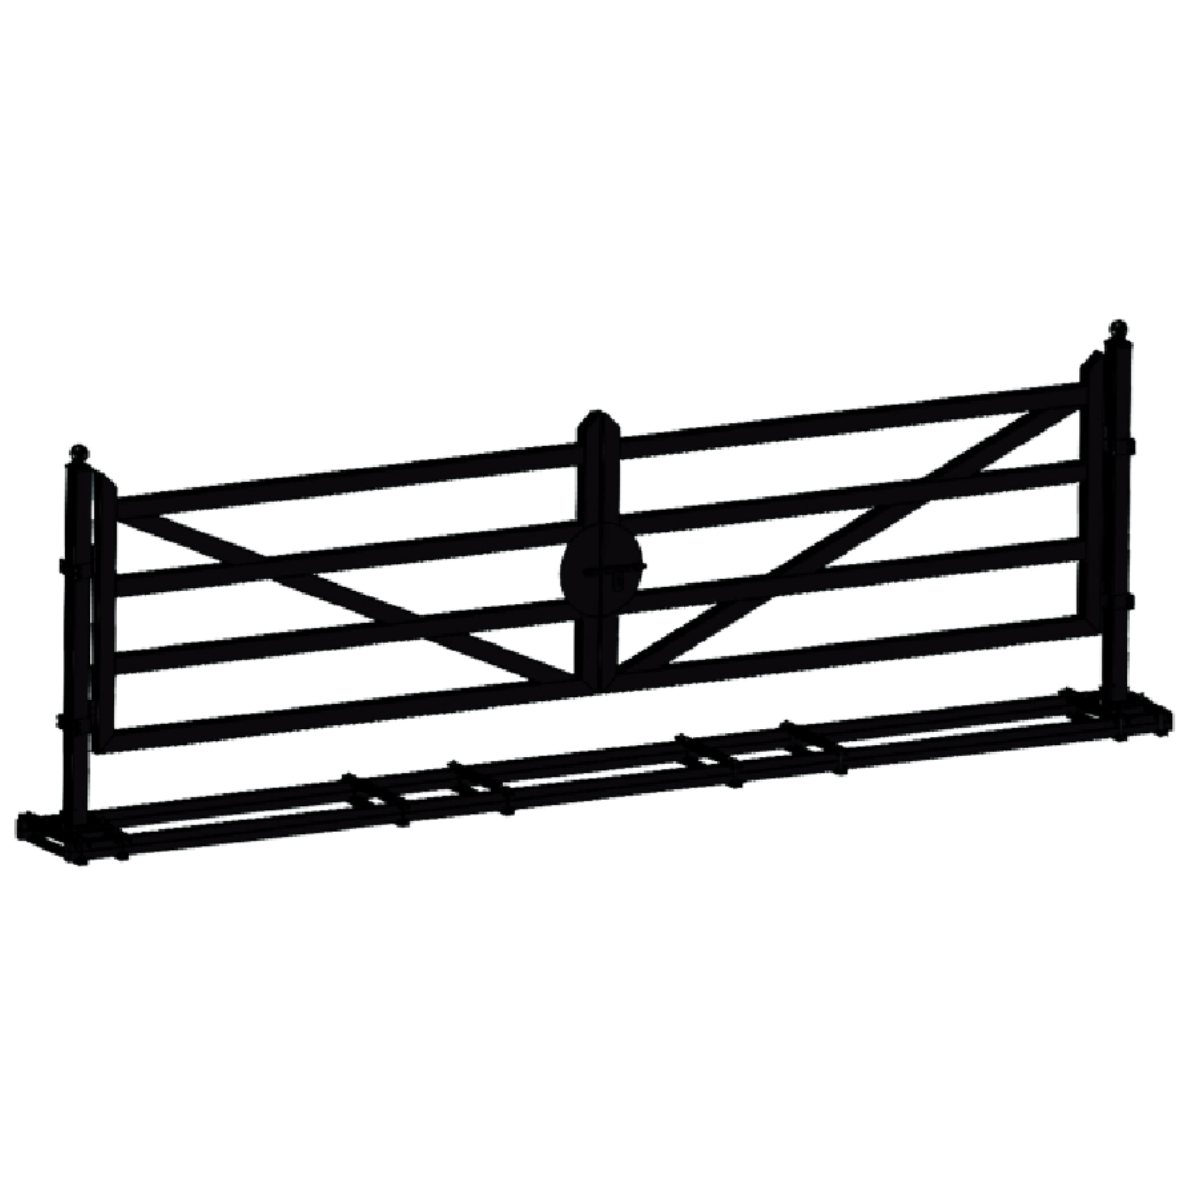 [AS-IS] 20ft Farm Metal Driveway Gate with Diagonal Tubes